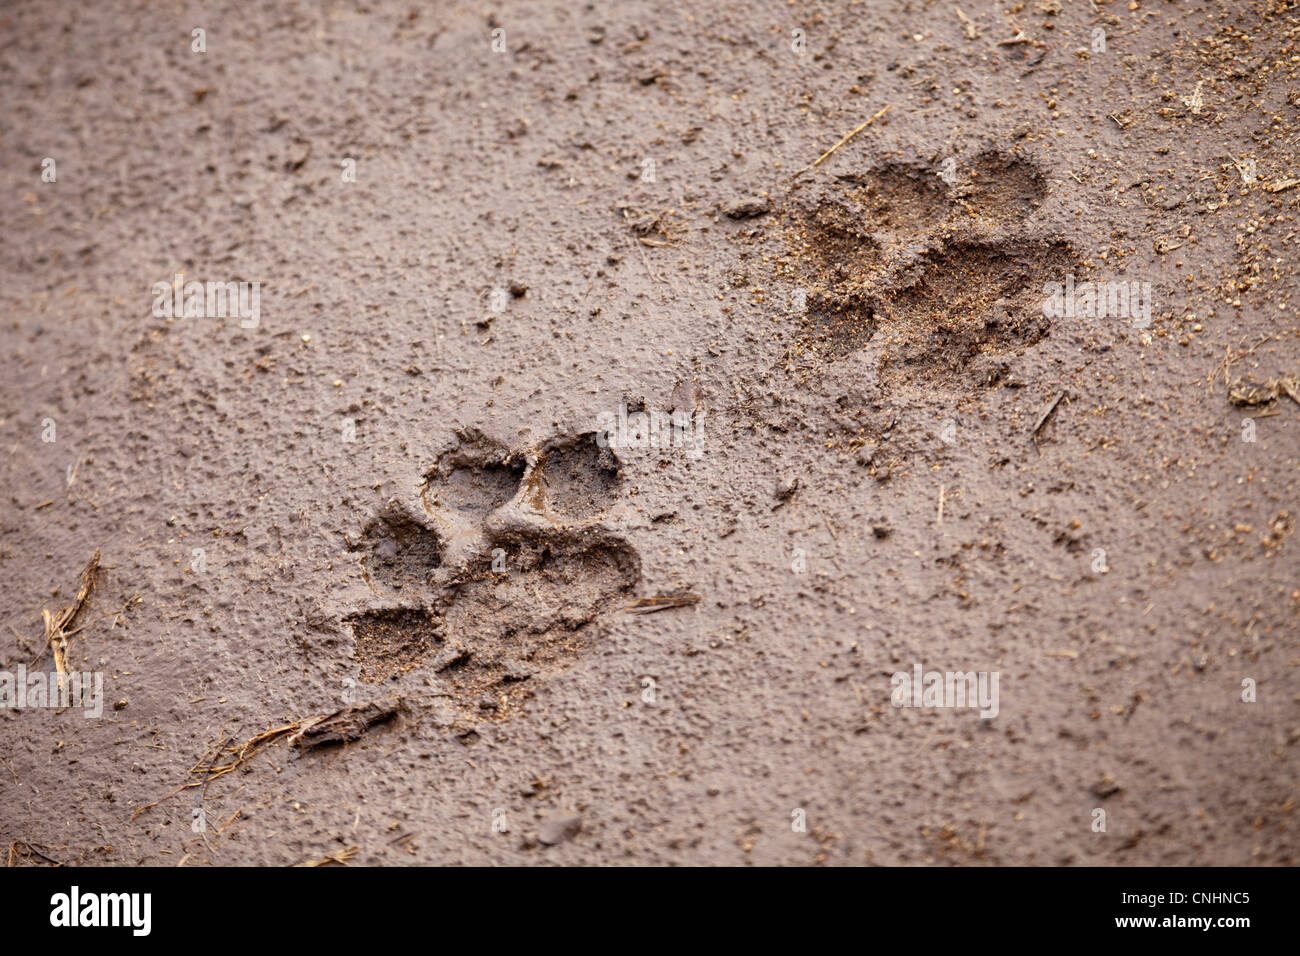 Mud-Brick With a Dog's Paw Print from Ur (Illustration) - World History  Encyclopedia